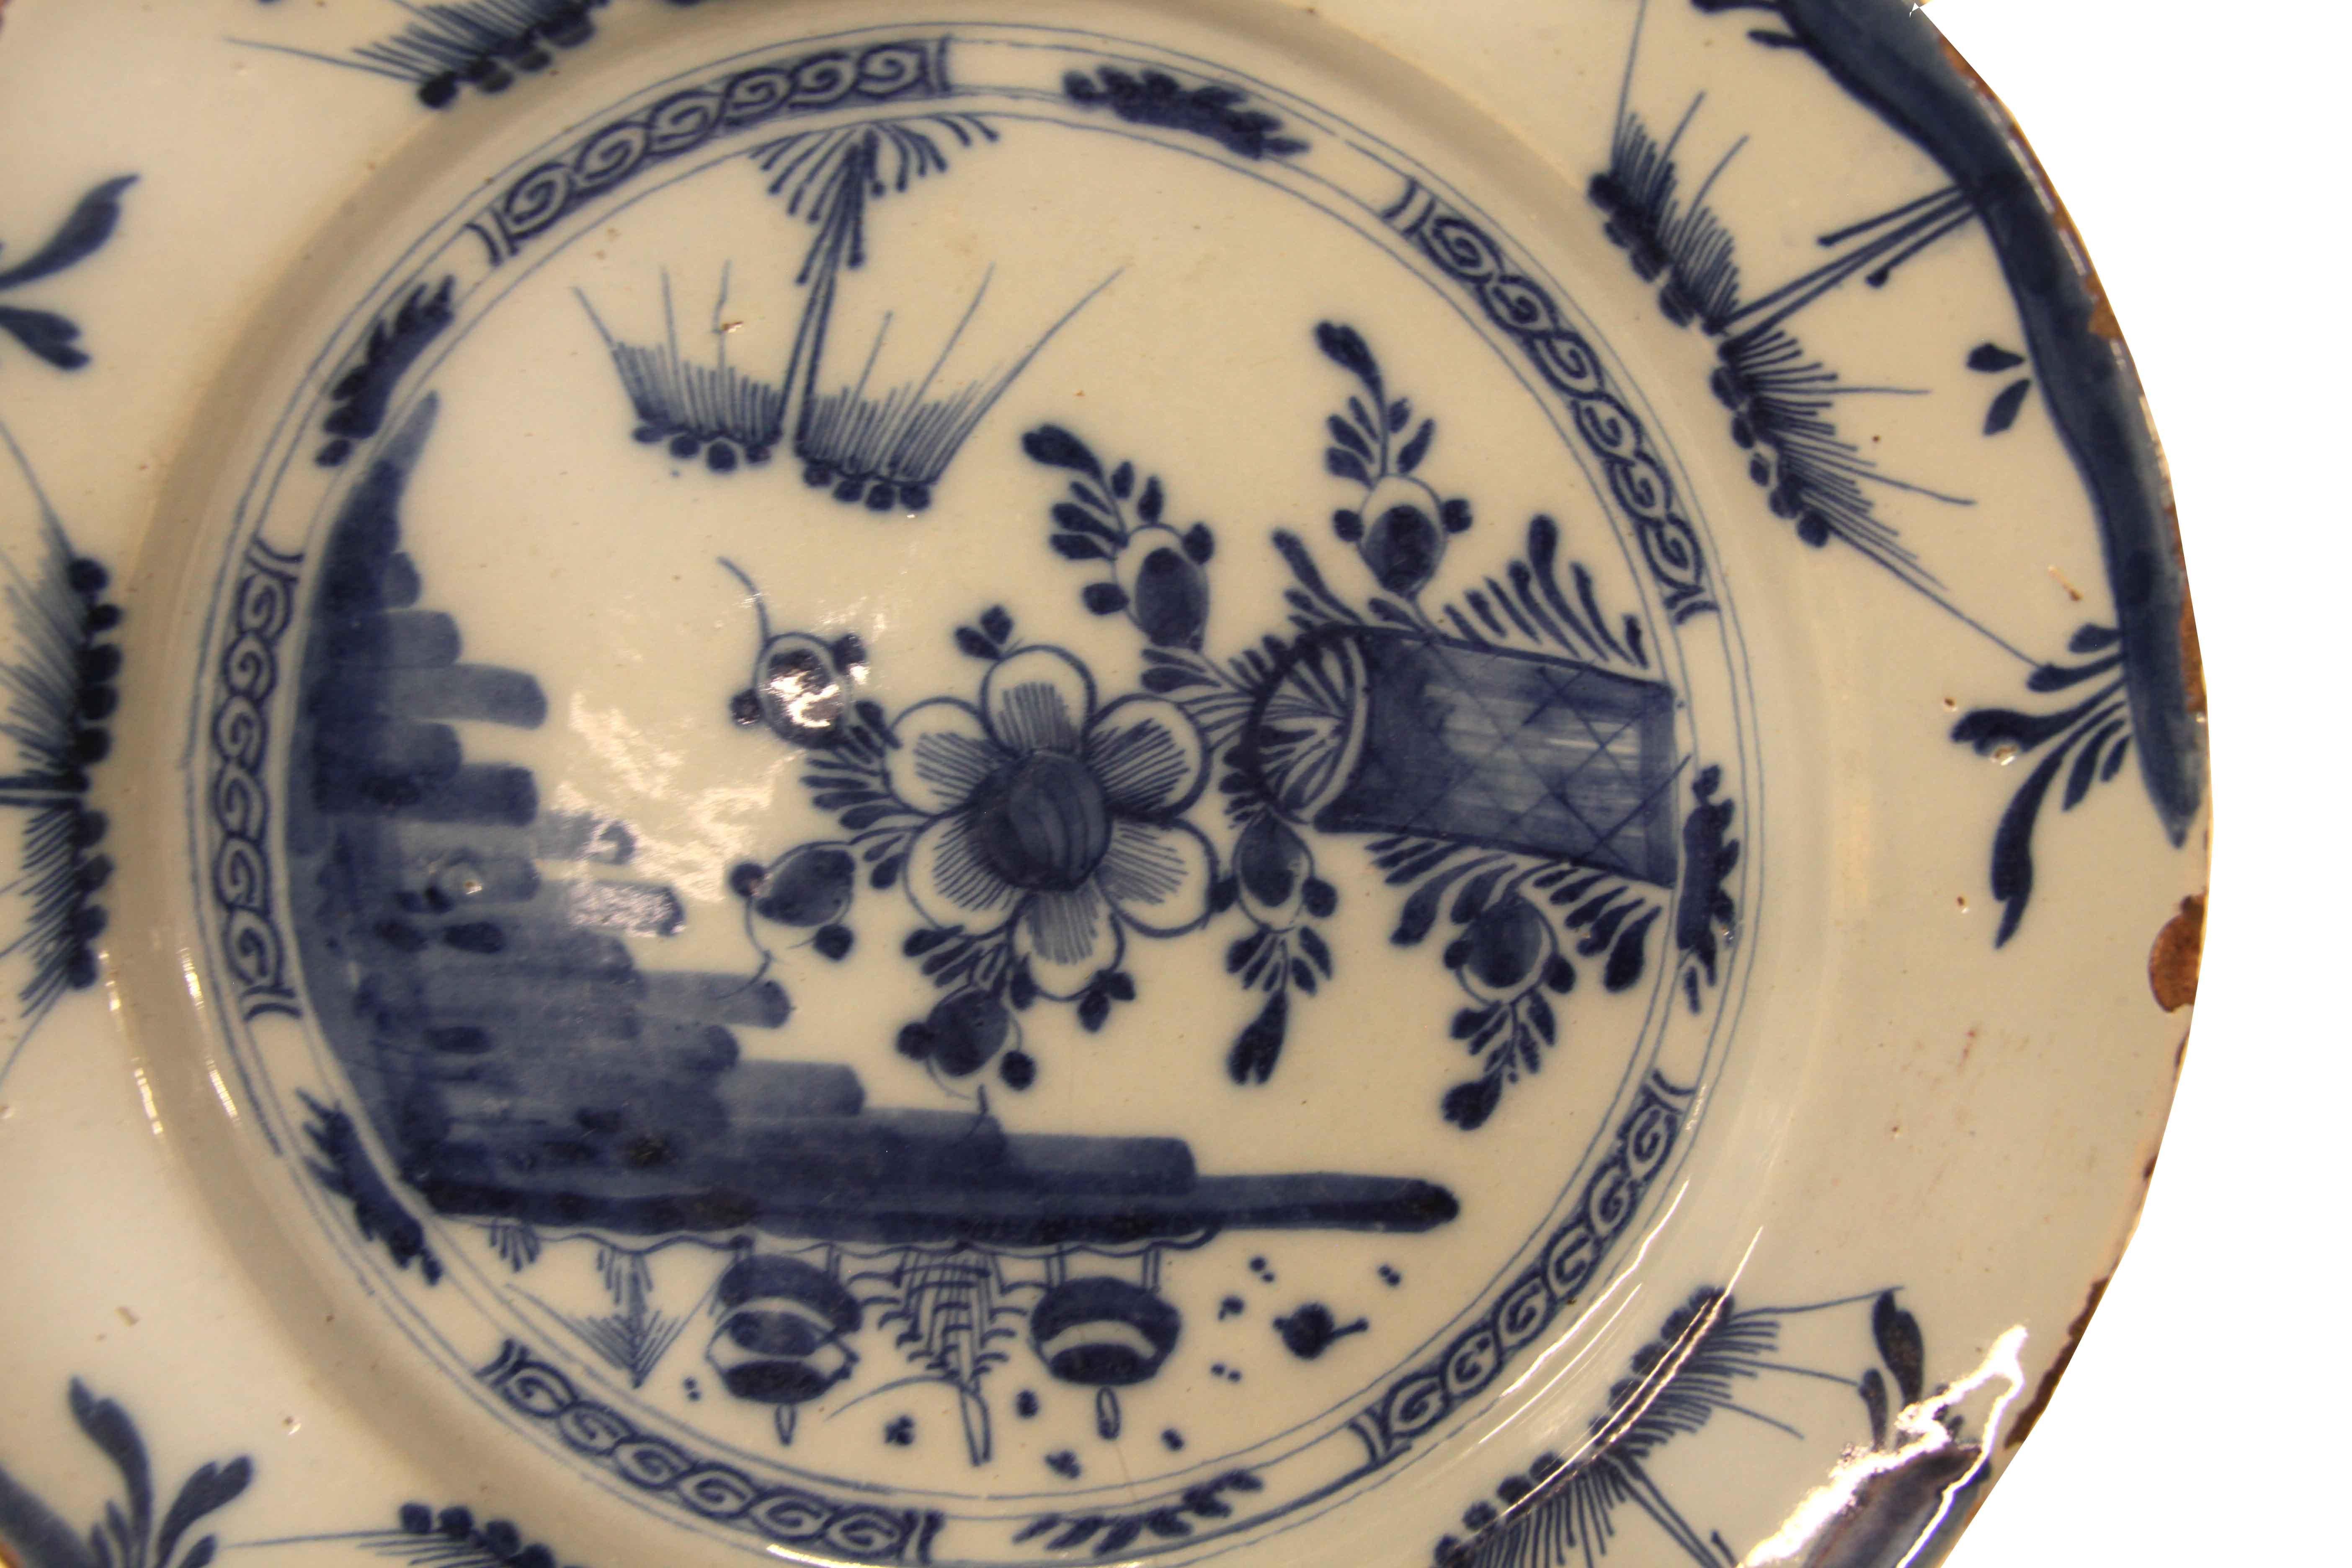 Glazed English Delft Blue and White Charger